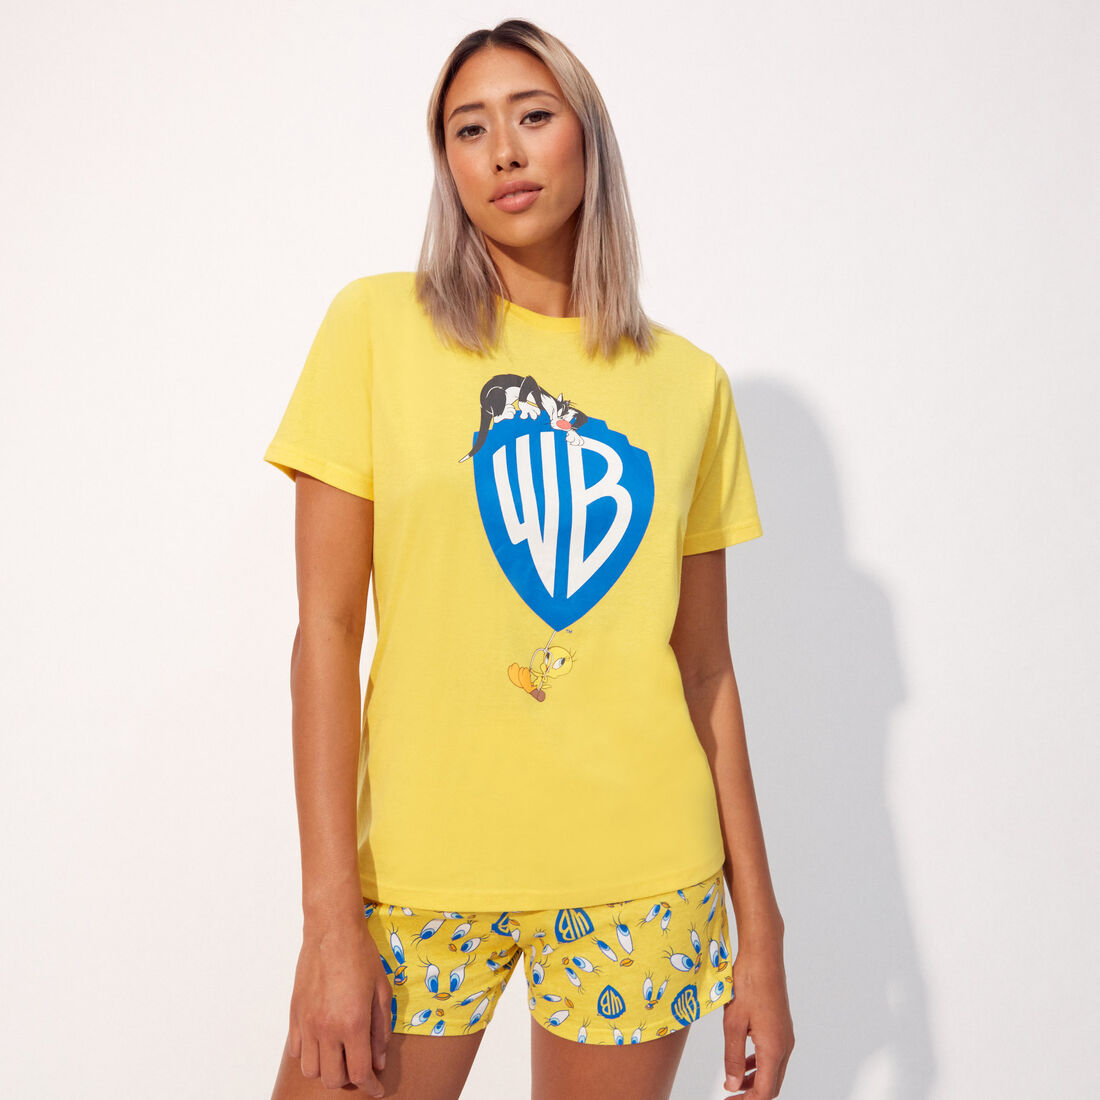 Tweety Pie and Sylvester short-sleeved loose-fitting T-shirt;